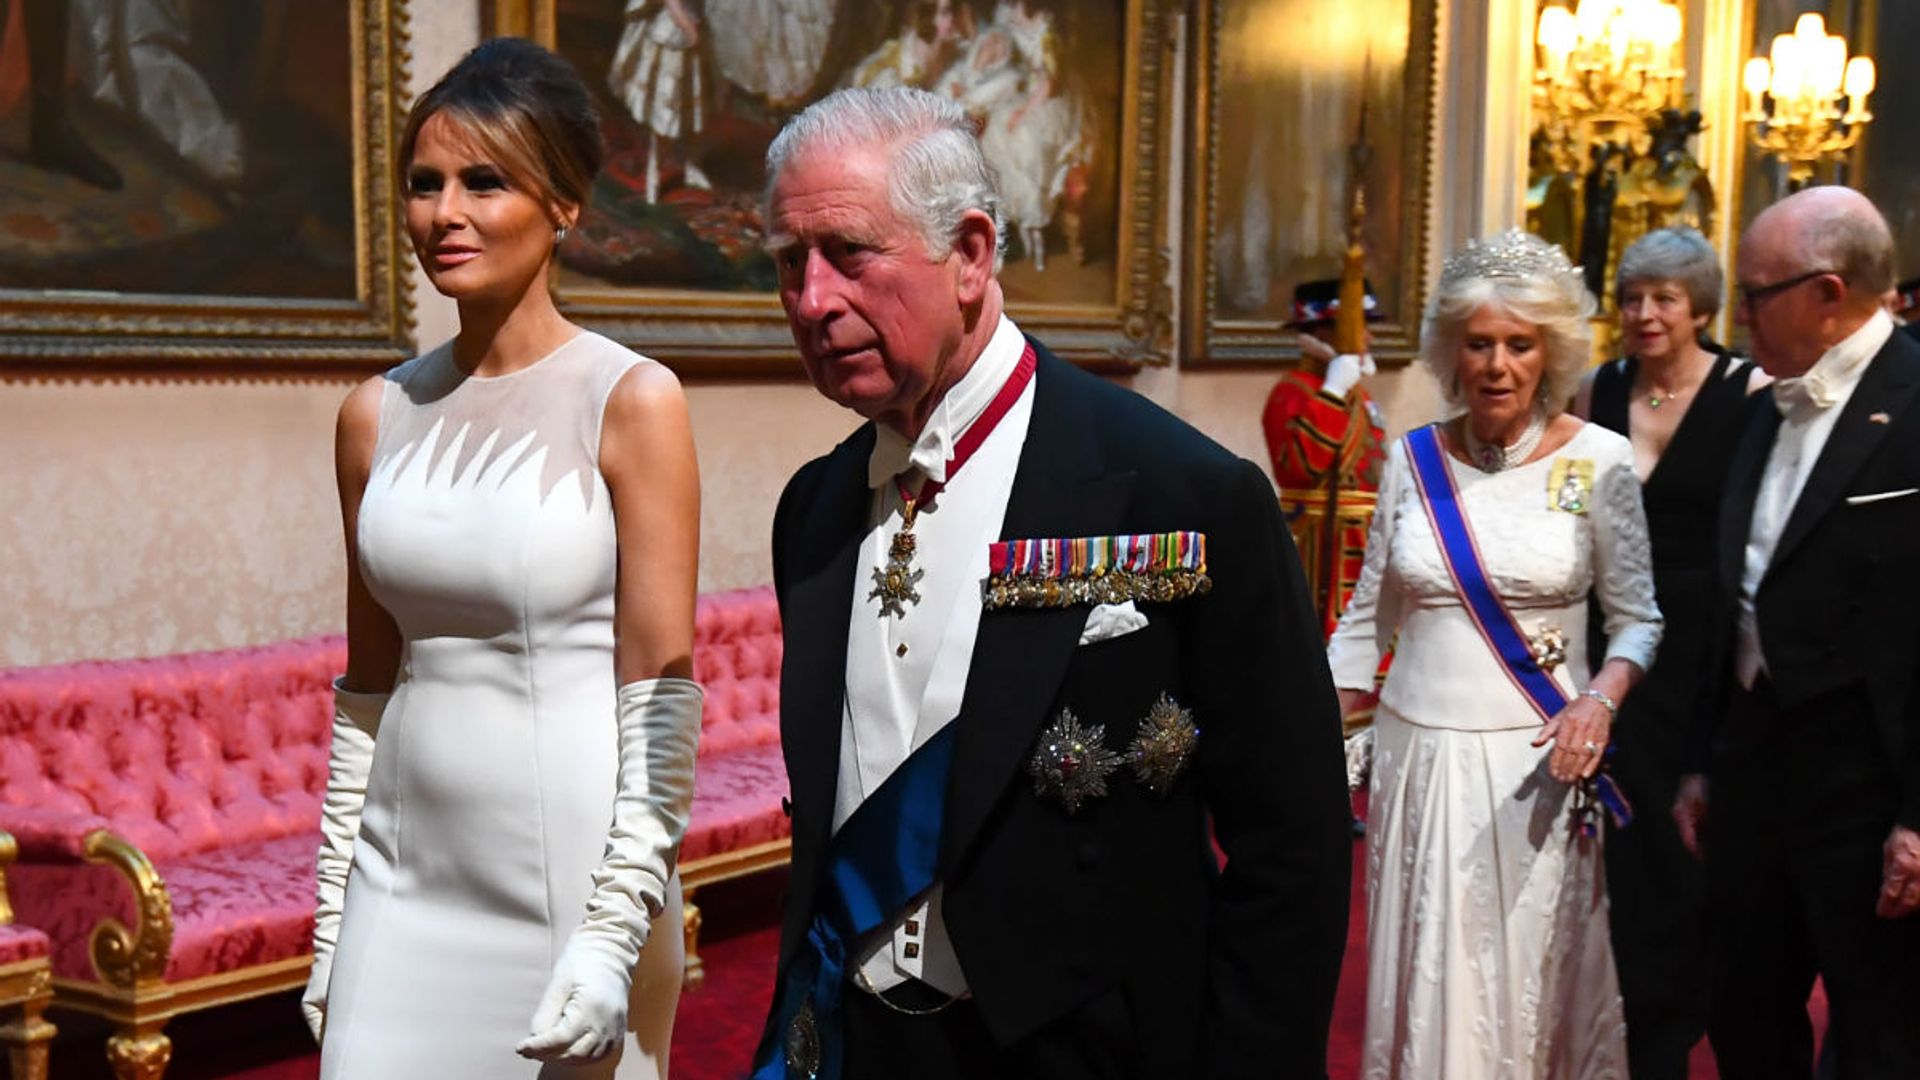 Melania, Ivanka and Tiffany Trump wear glamorous gowns for the Queen's state banquet